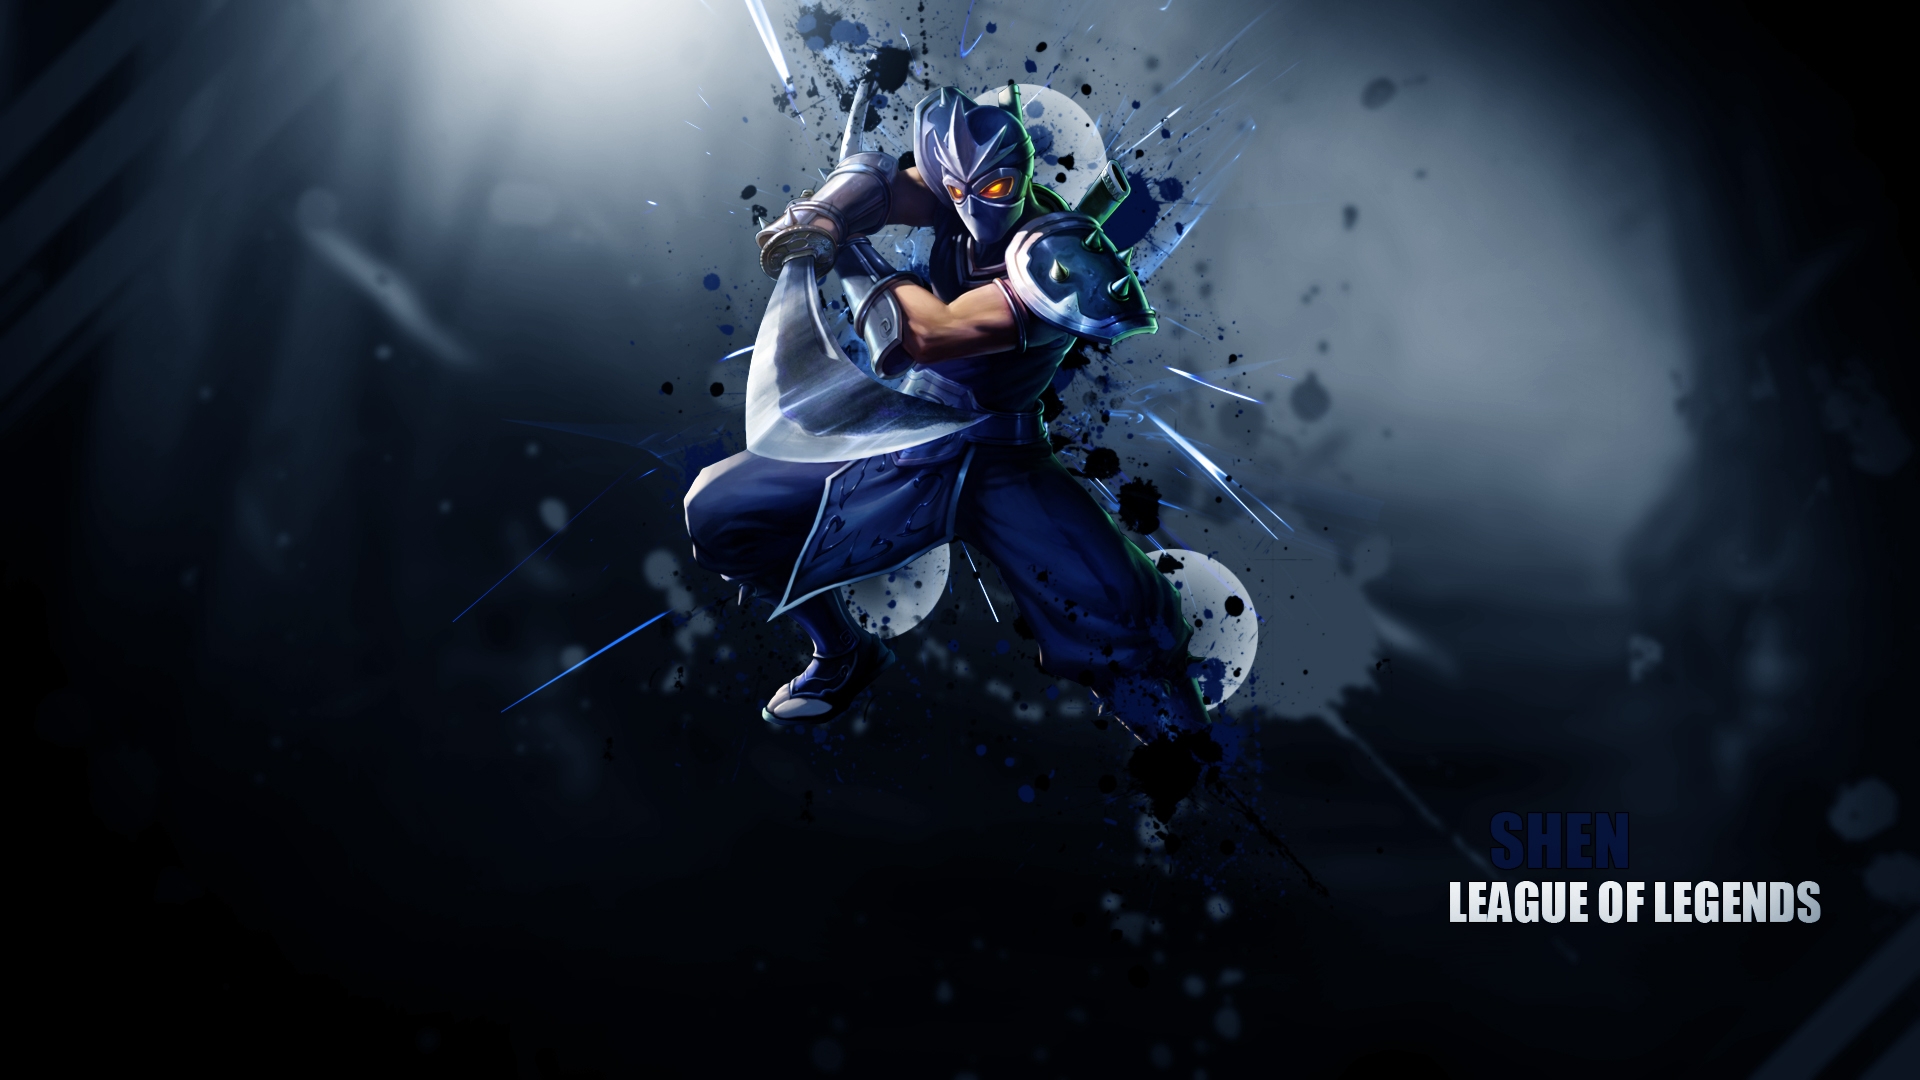 Pin Draven Classic Skin League Of Legends Wallpaper On